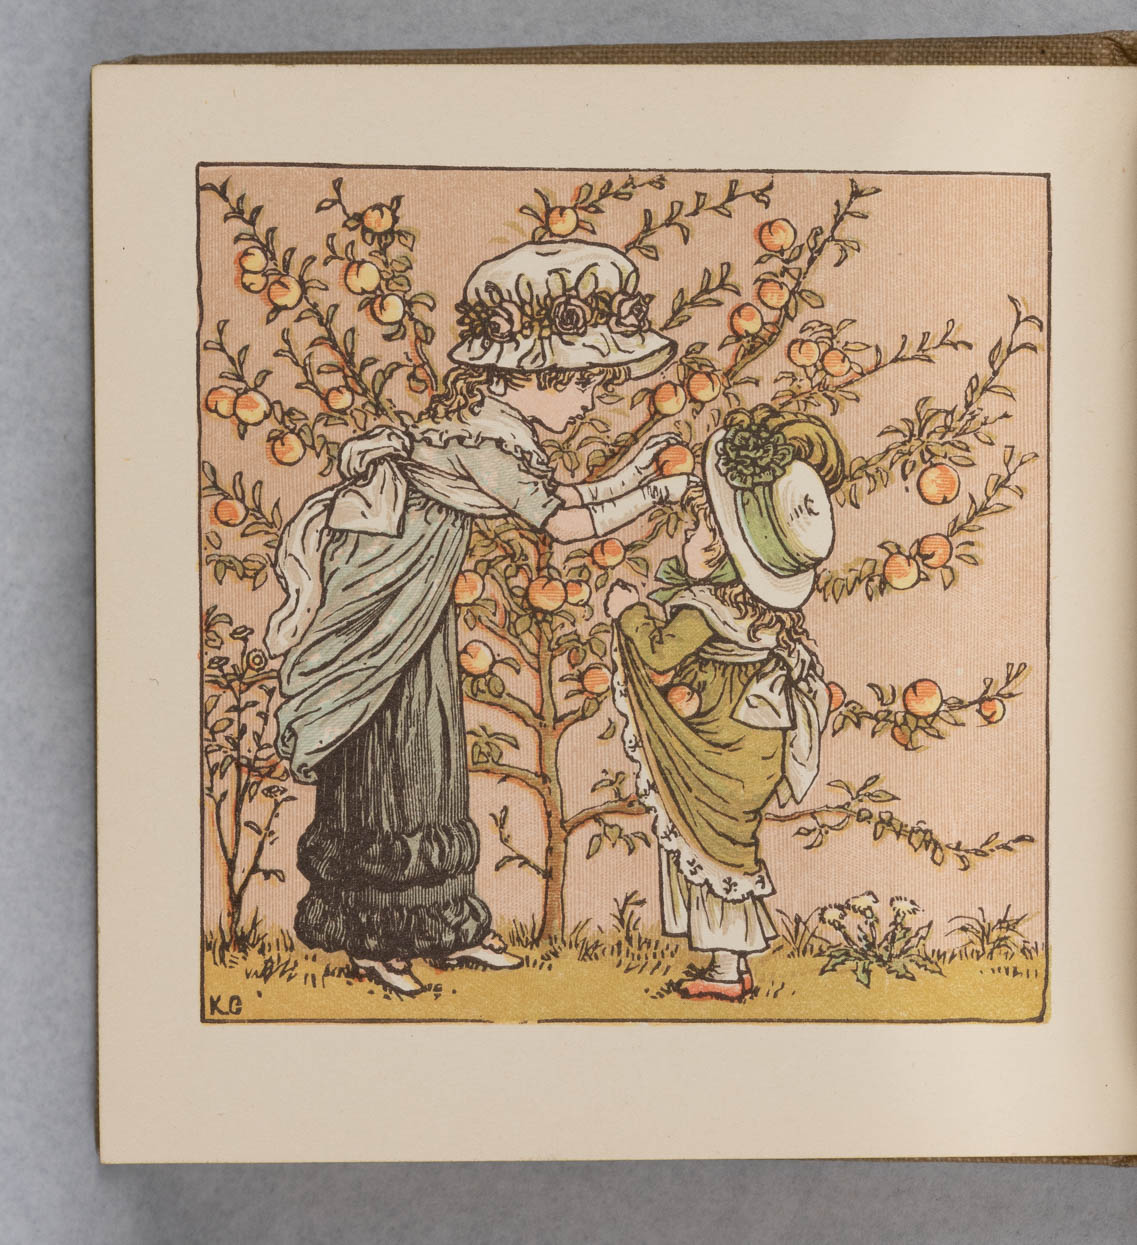 Image from Kate Greenaway birthday book